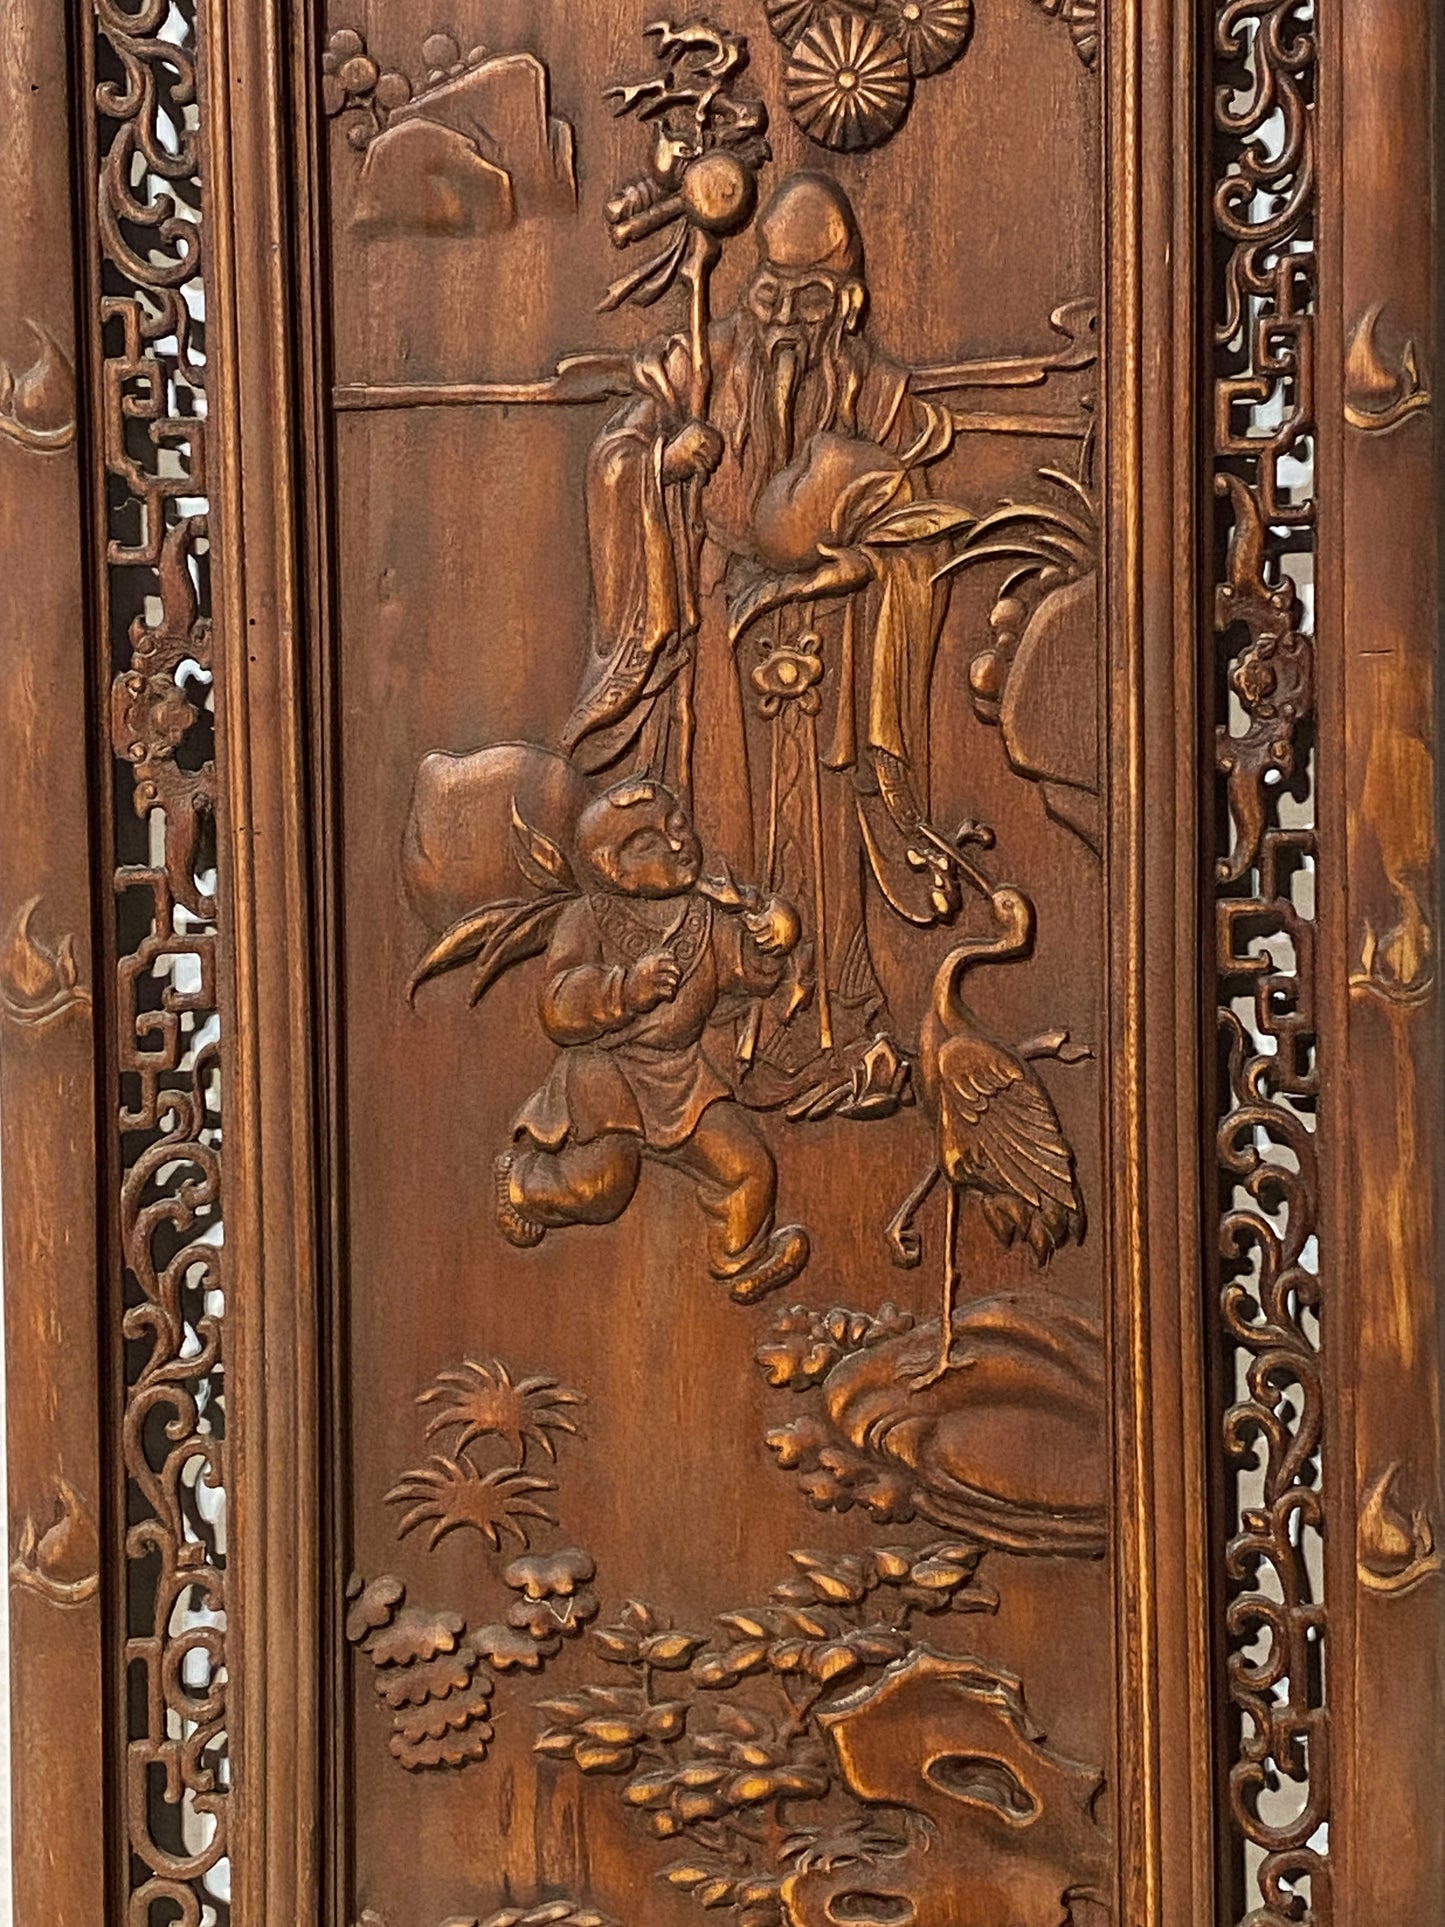 #5533 Chinoiserie Wood Wall Panel W/Figures 49" H